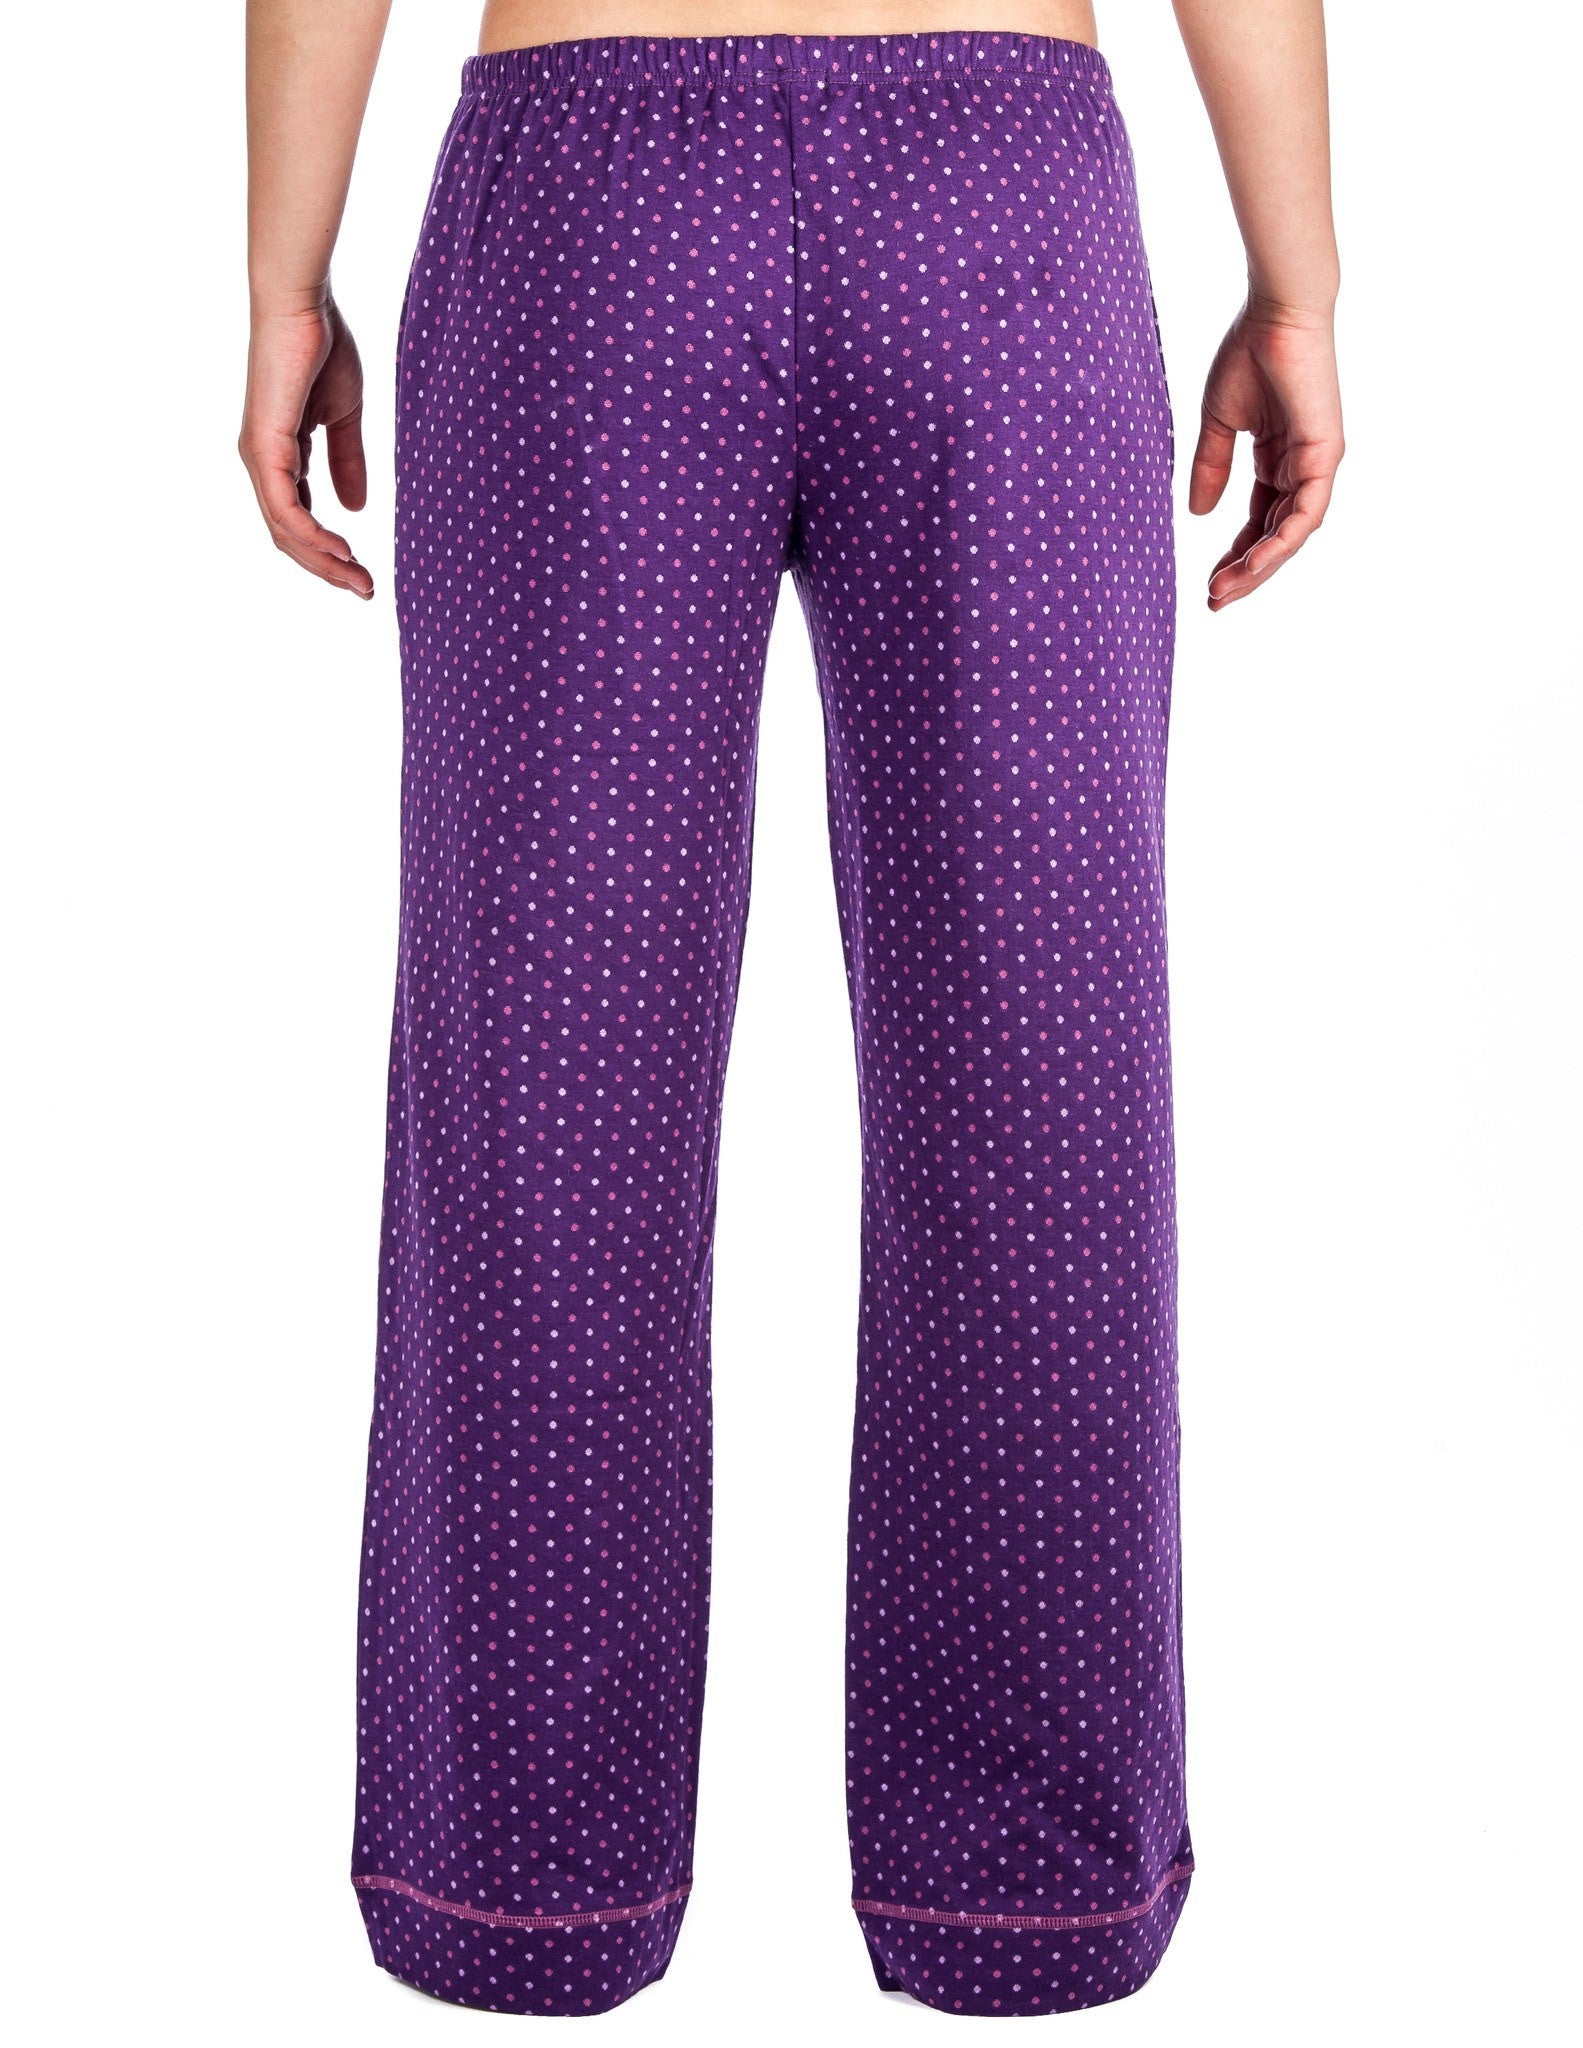 Polka Dots - Purple (Relaxed Fit)